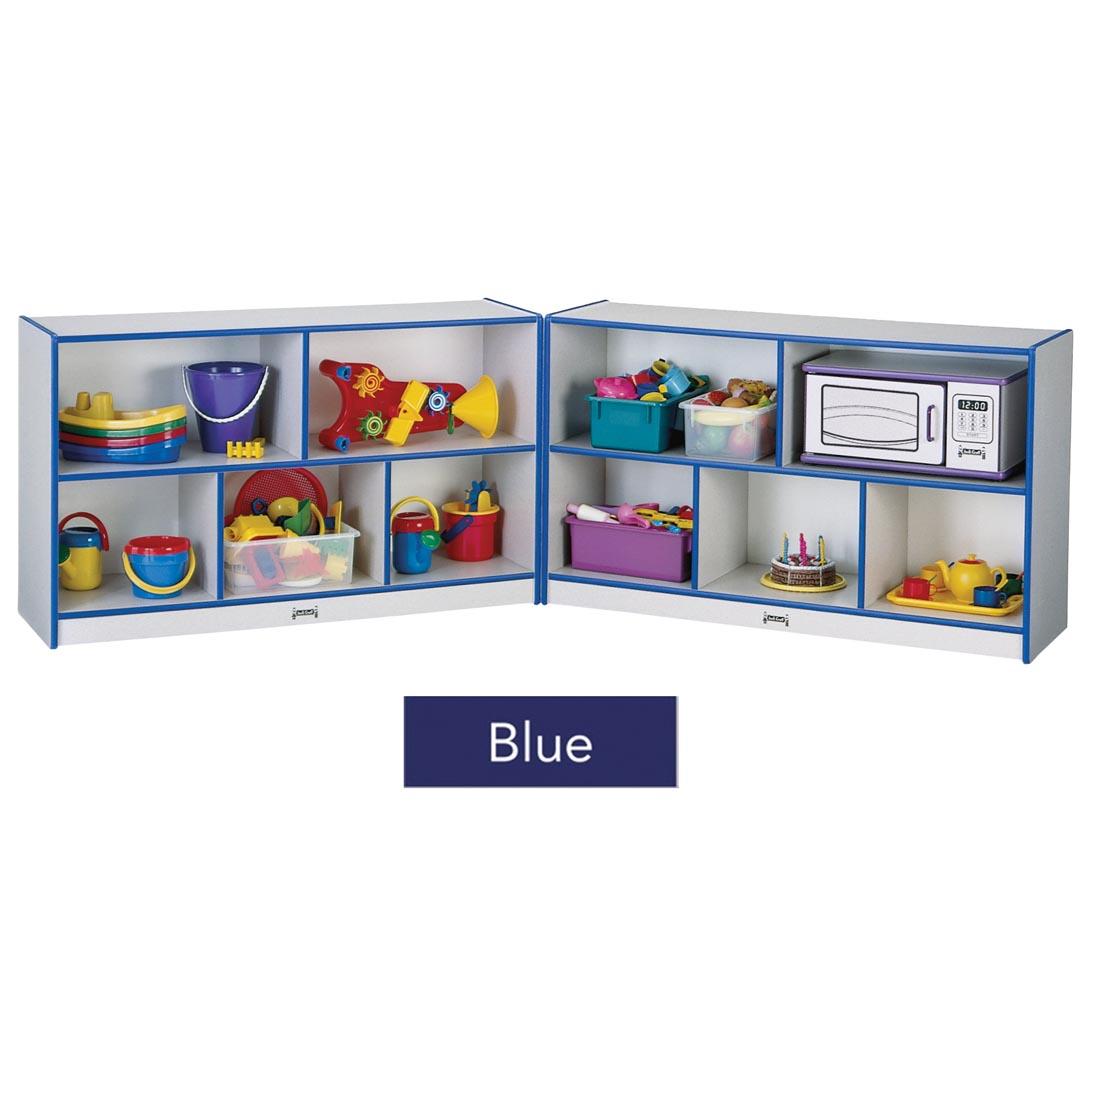 Blue Edge Fold-n-Lock Low Shelving shown with suggested storage contents; text overlay of Blue